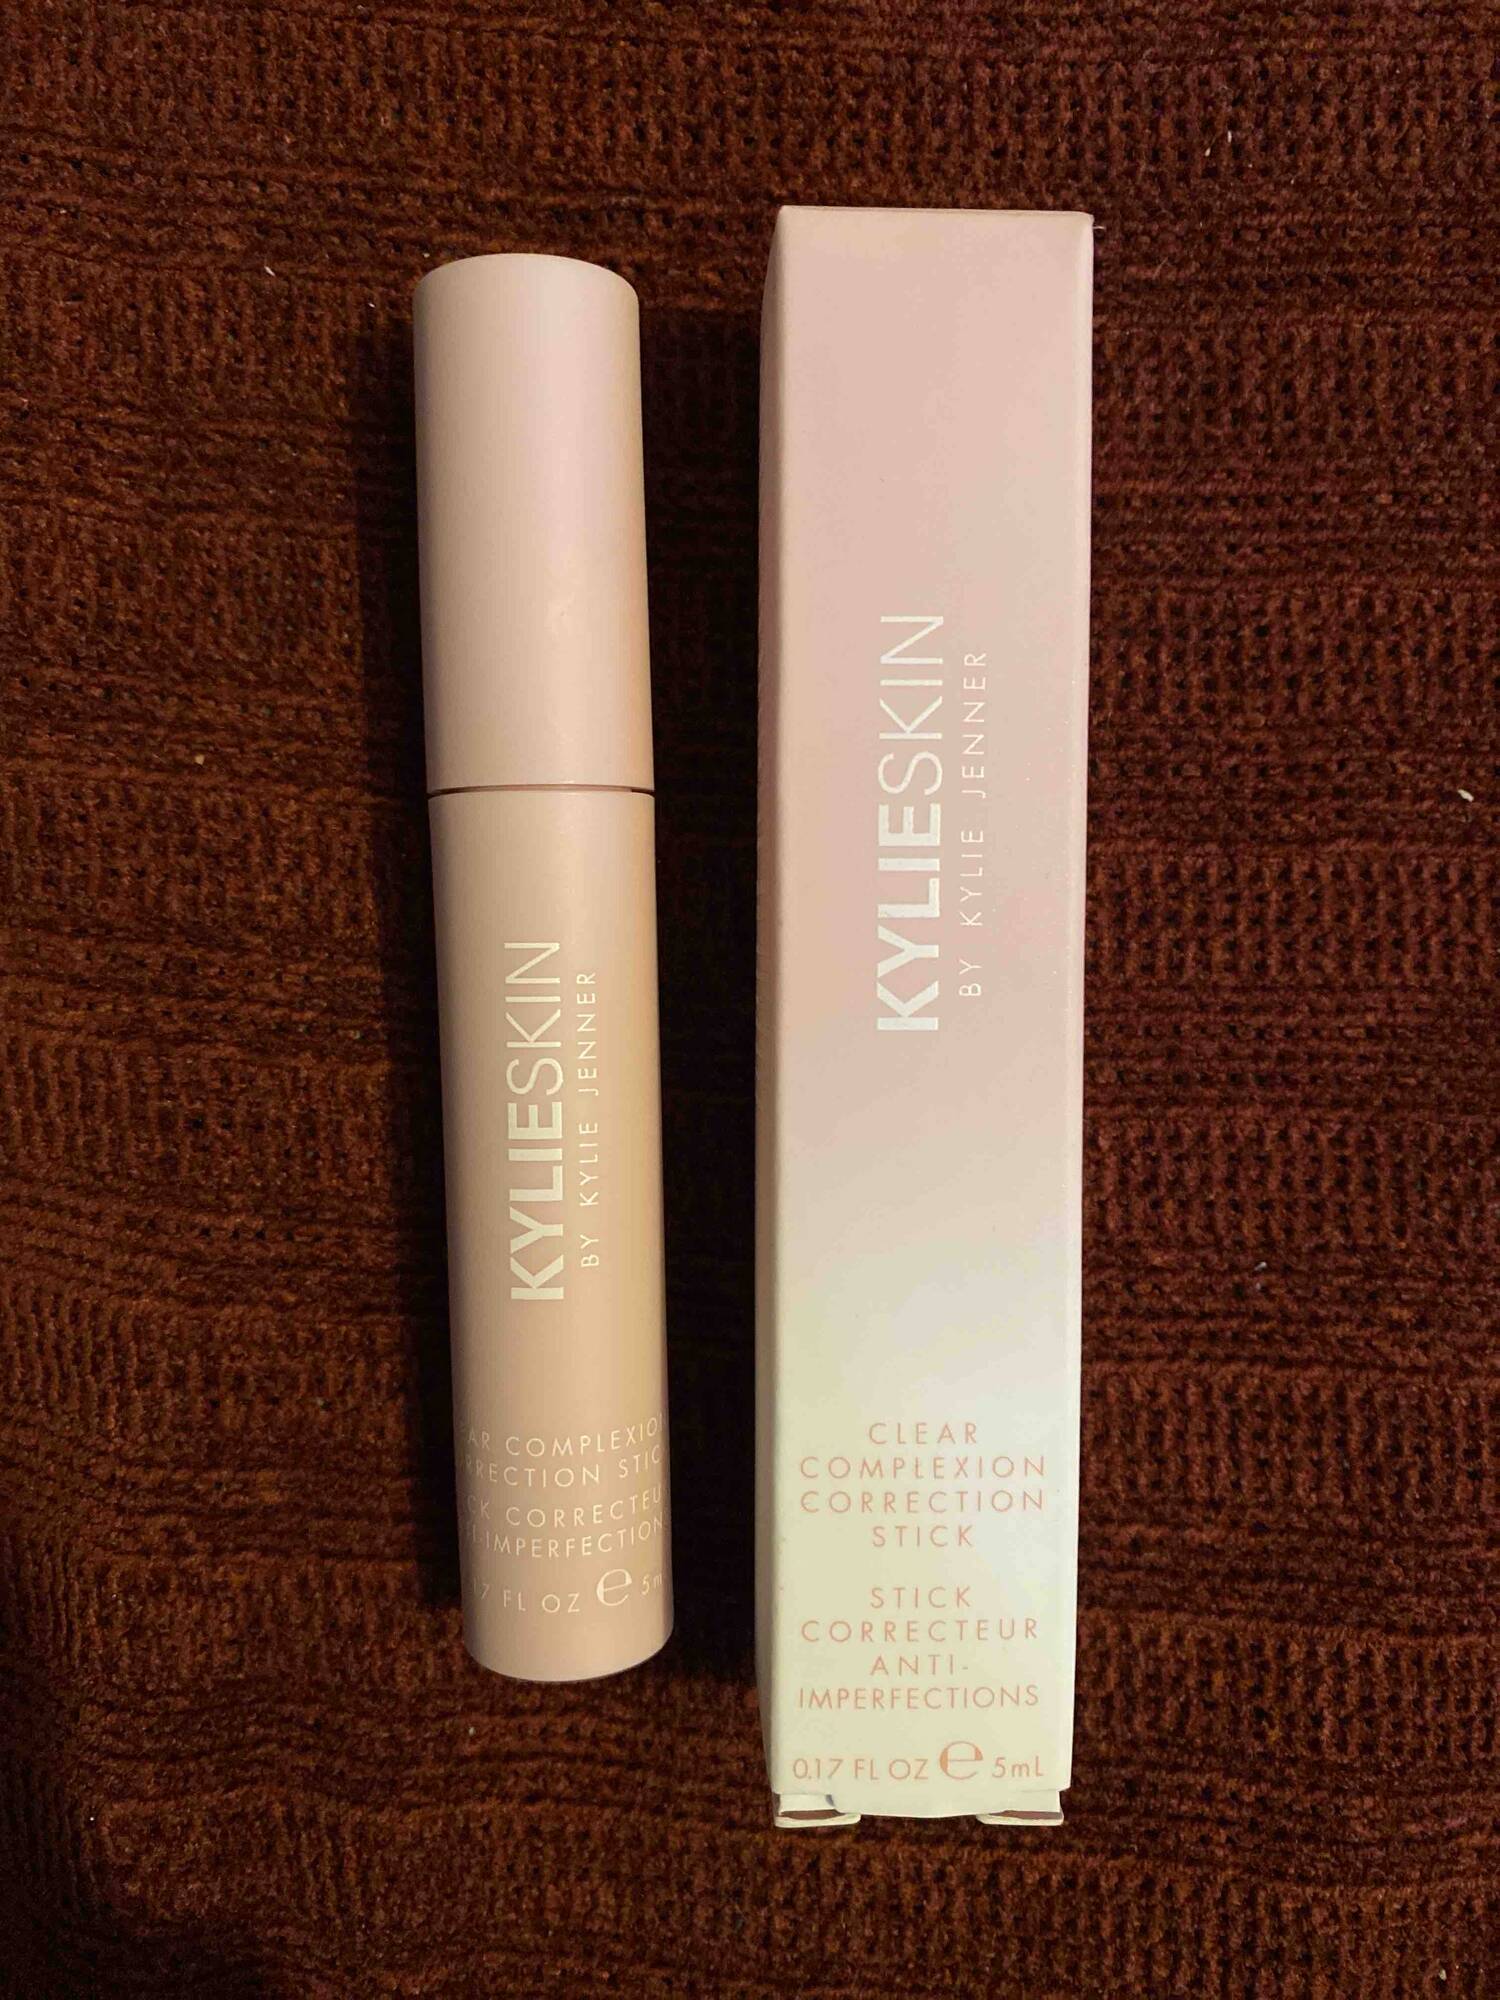 KYLIE SKIN - Clear complexion correction stick